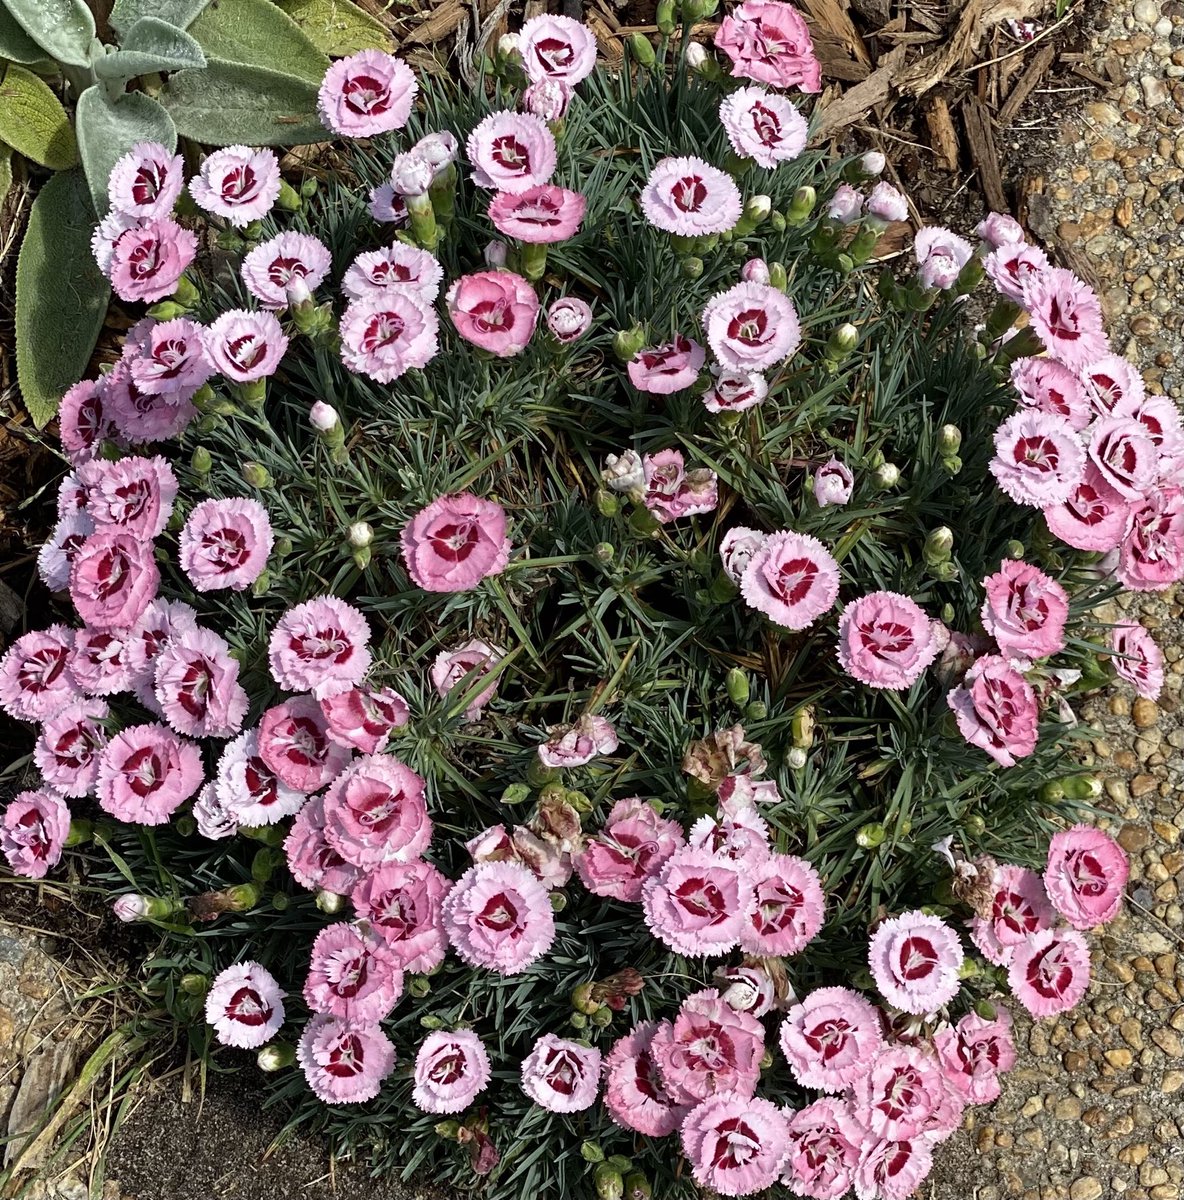 Sweet William for #MagentaMonday. Such pretty blossoms! Hope it’s a day that you can get your hands dirty. #GardeningX #Flowers #MasterGardener